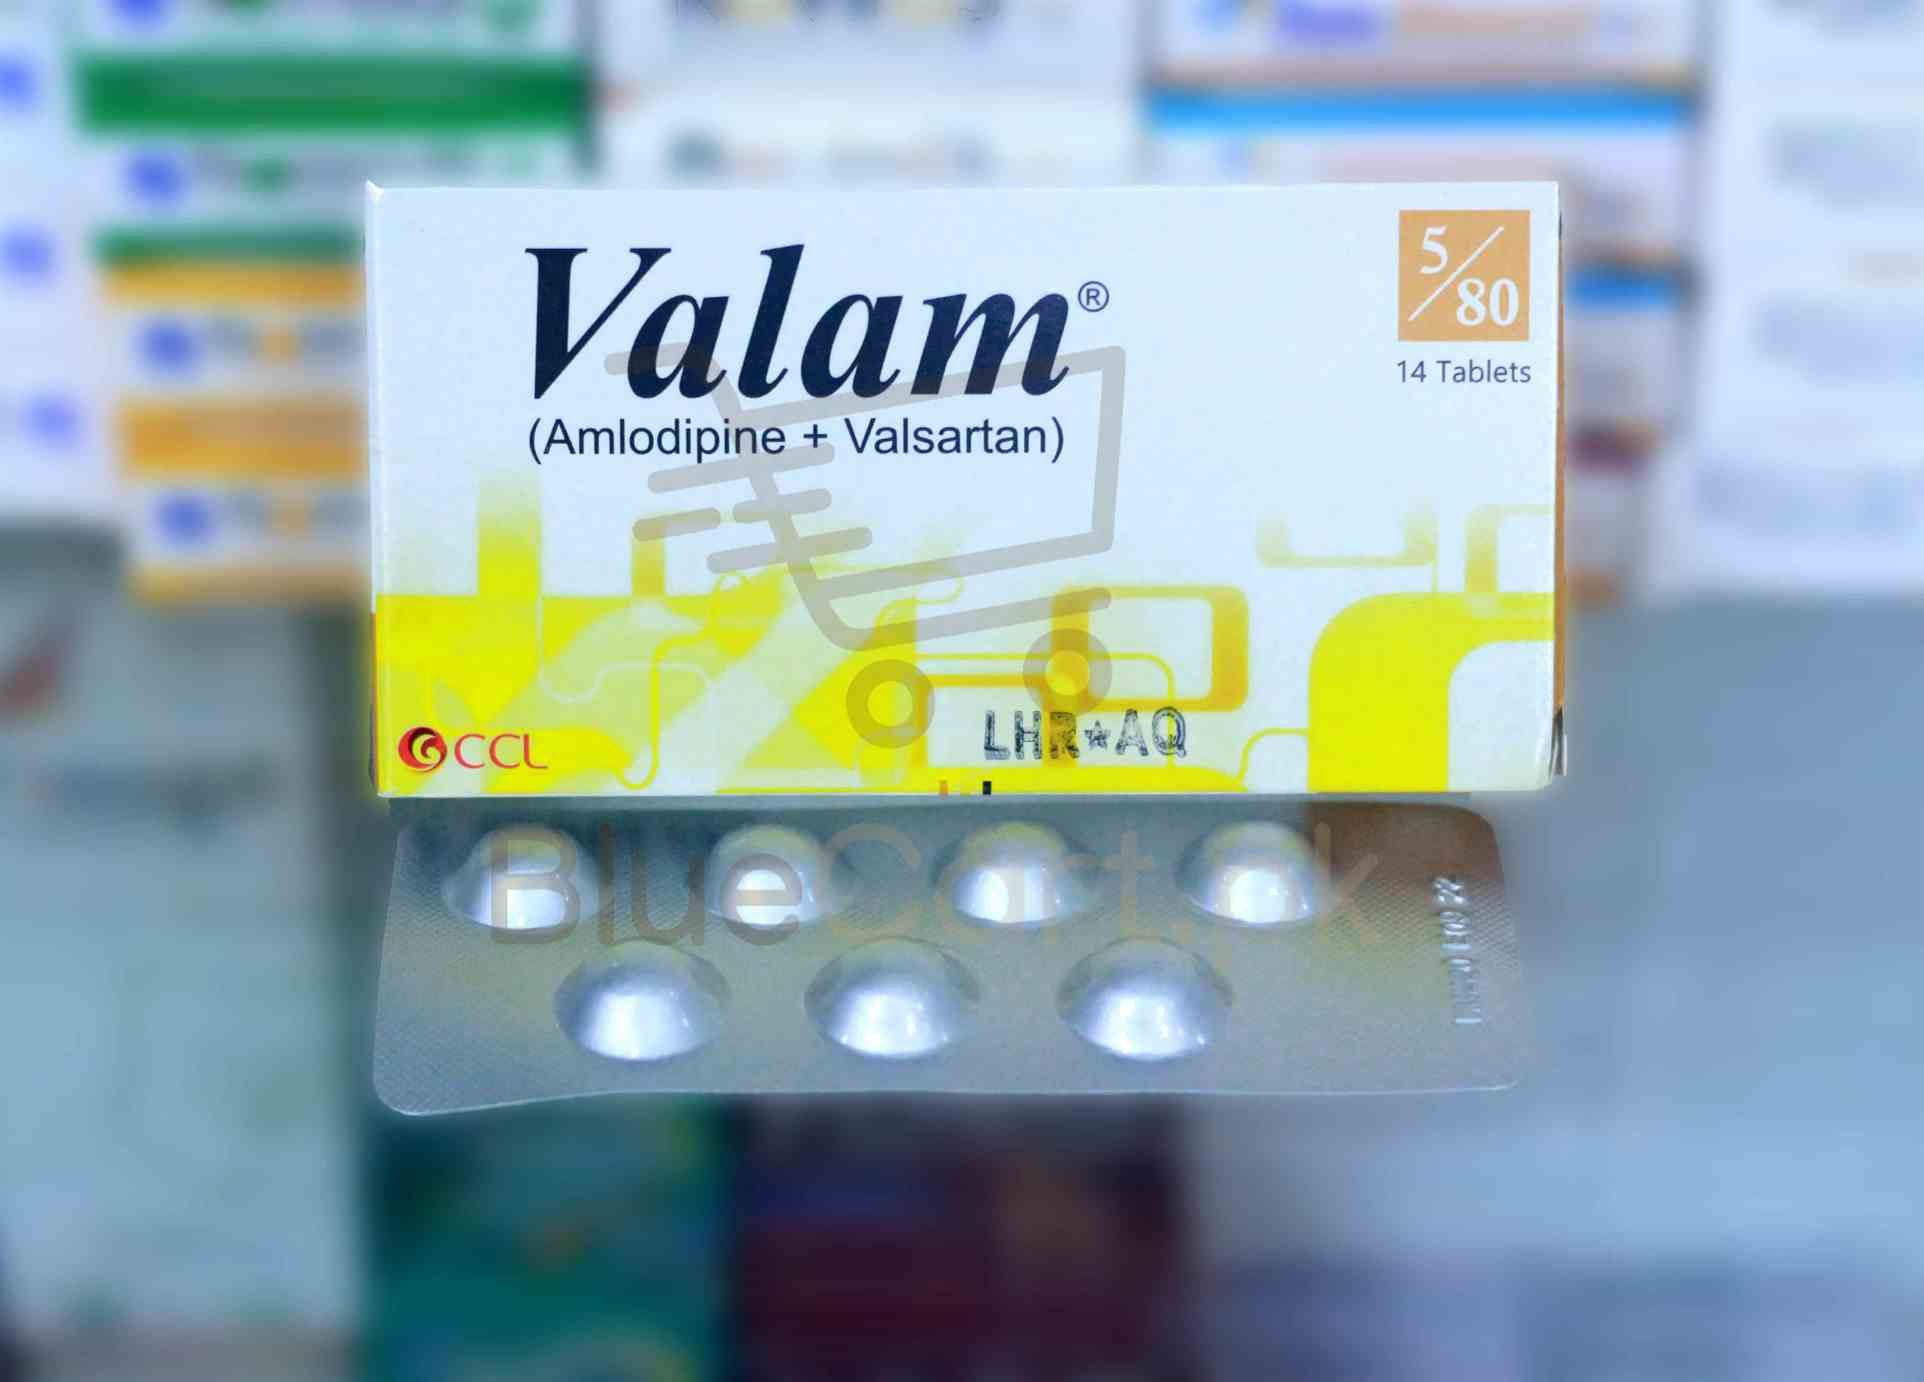 Valam Tablet 5-80mg